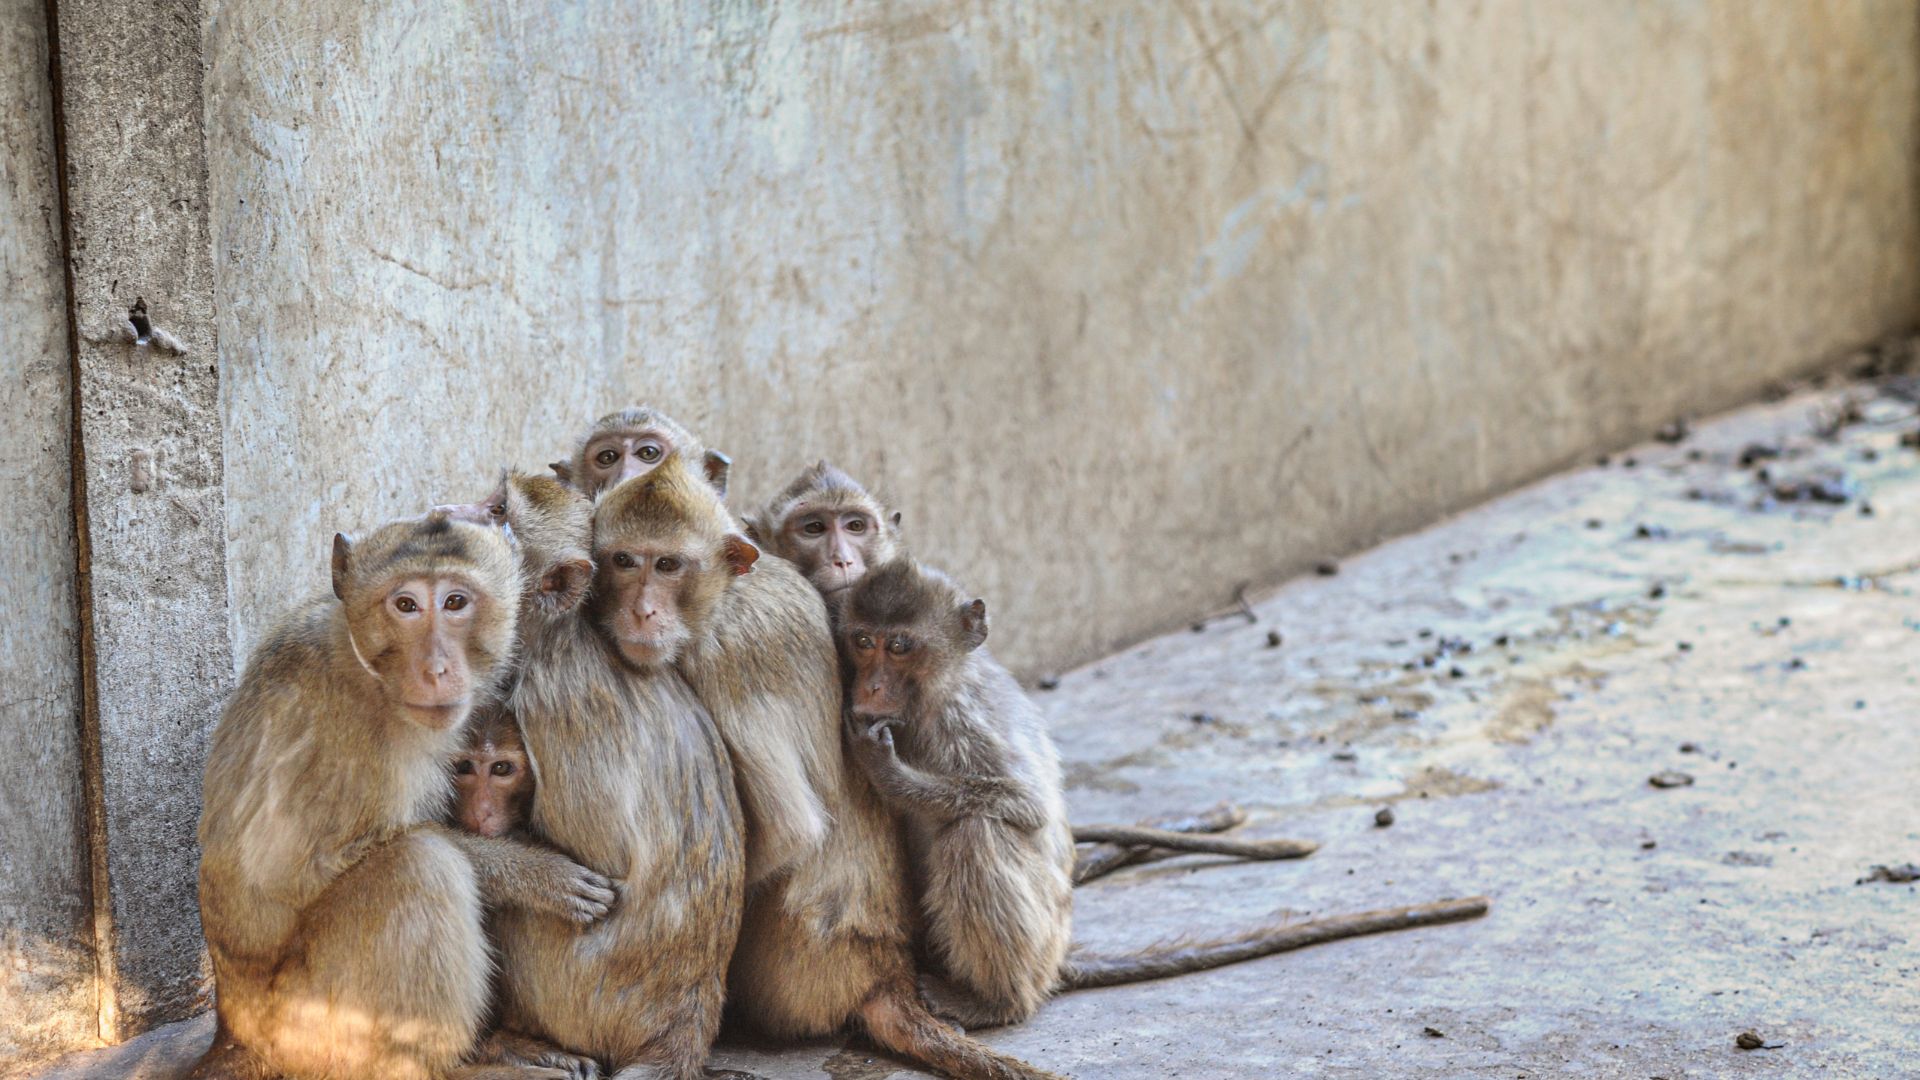 In many parts of the world, macaques and other small primates are bred for use in research in dire squalid conditions. Image Credit: We Animals Media.